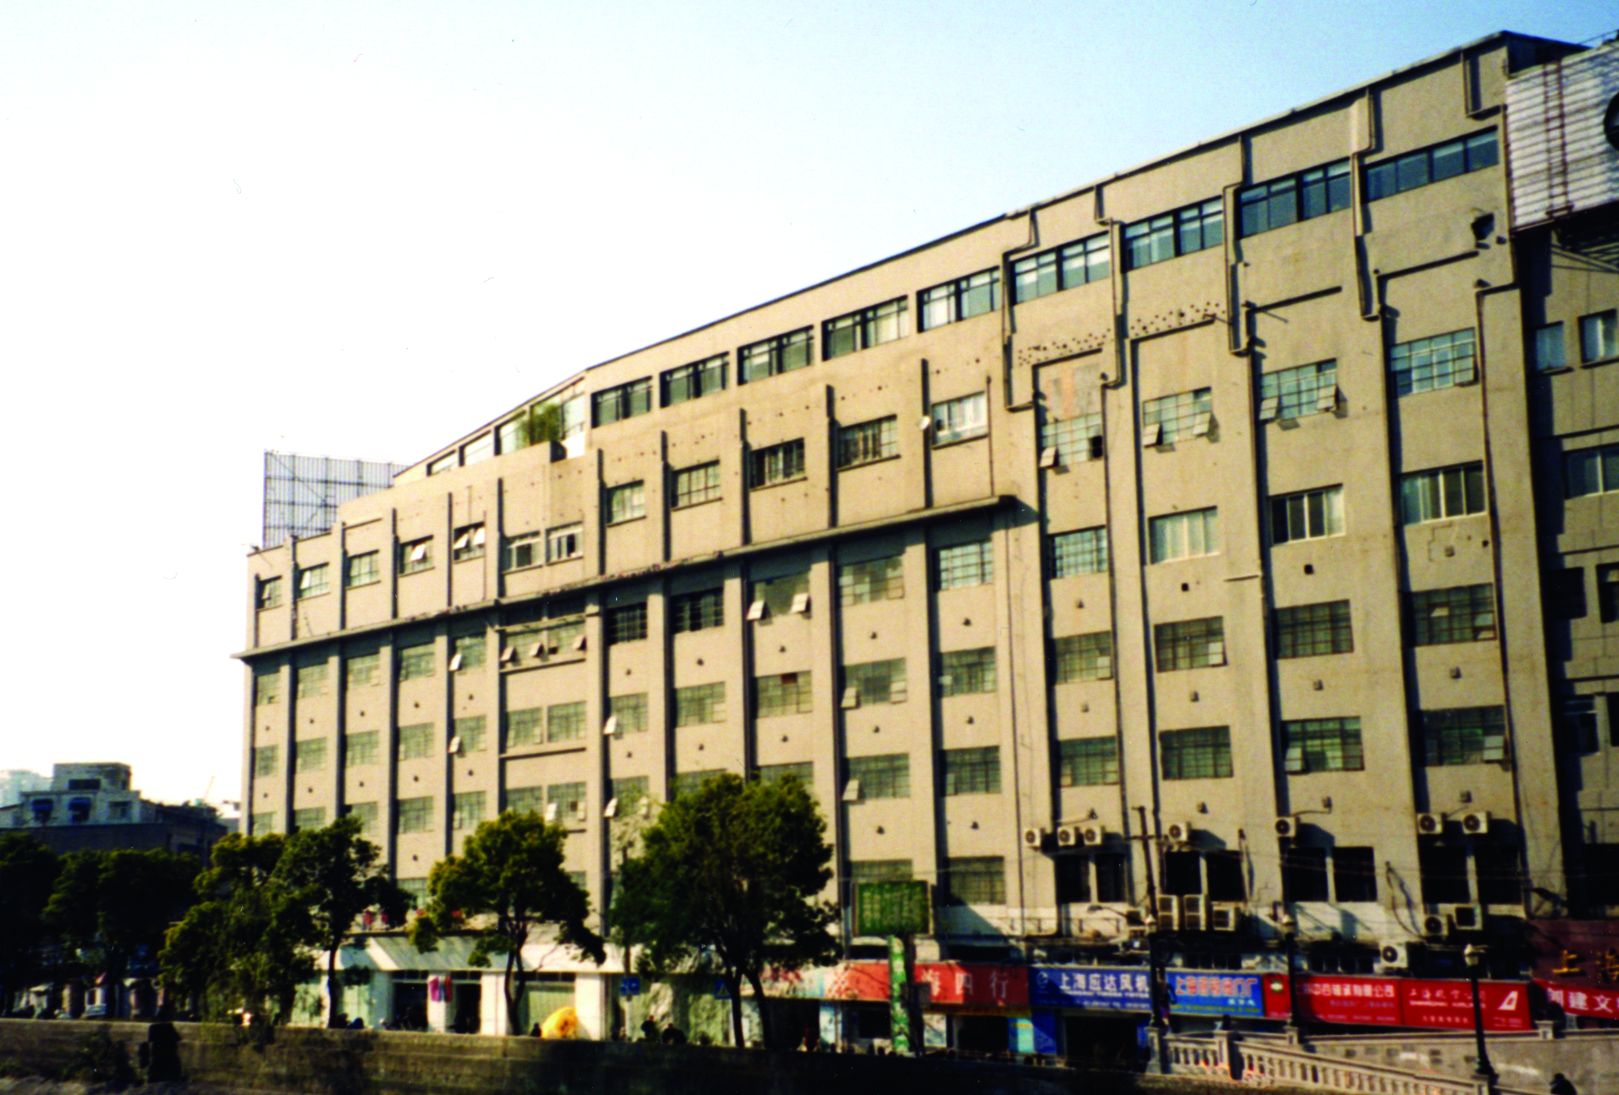 The Sihang Warehouse as it appears today.